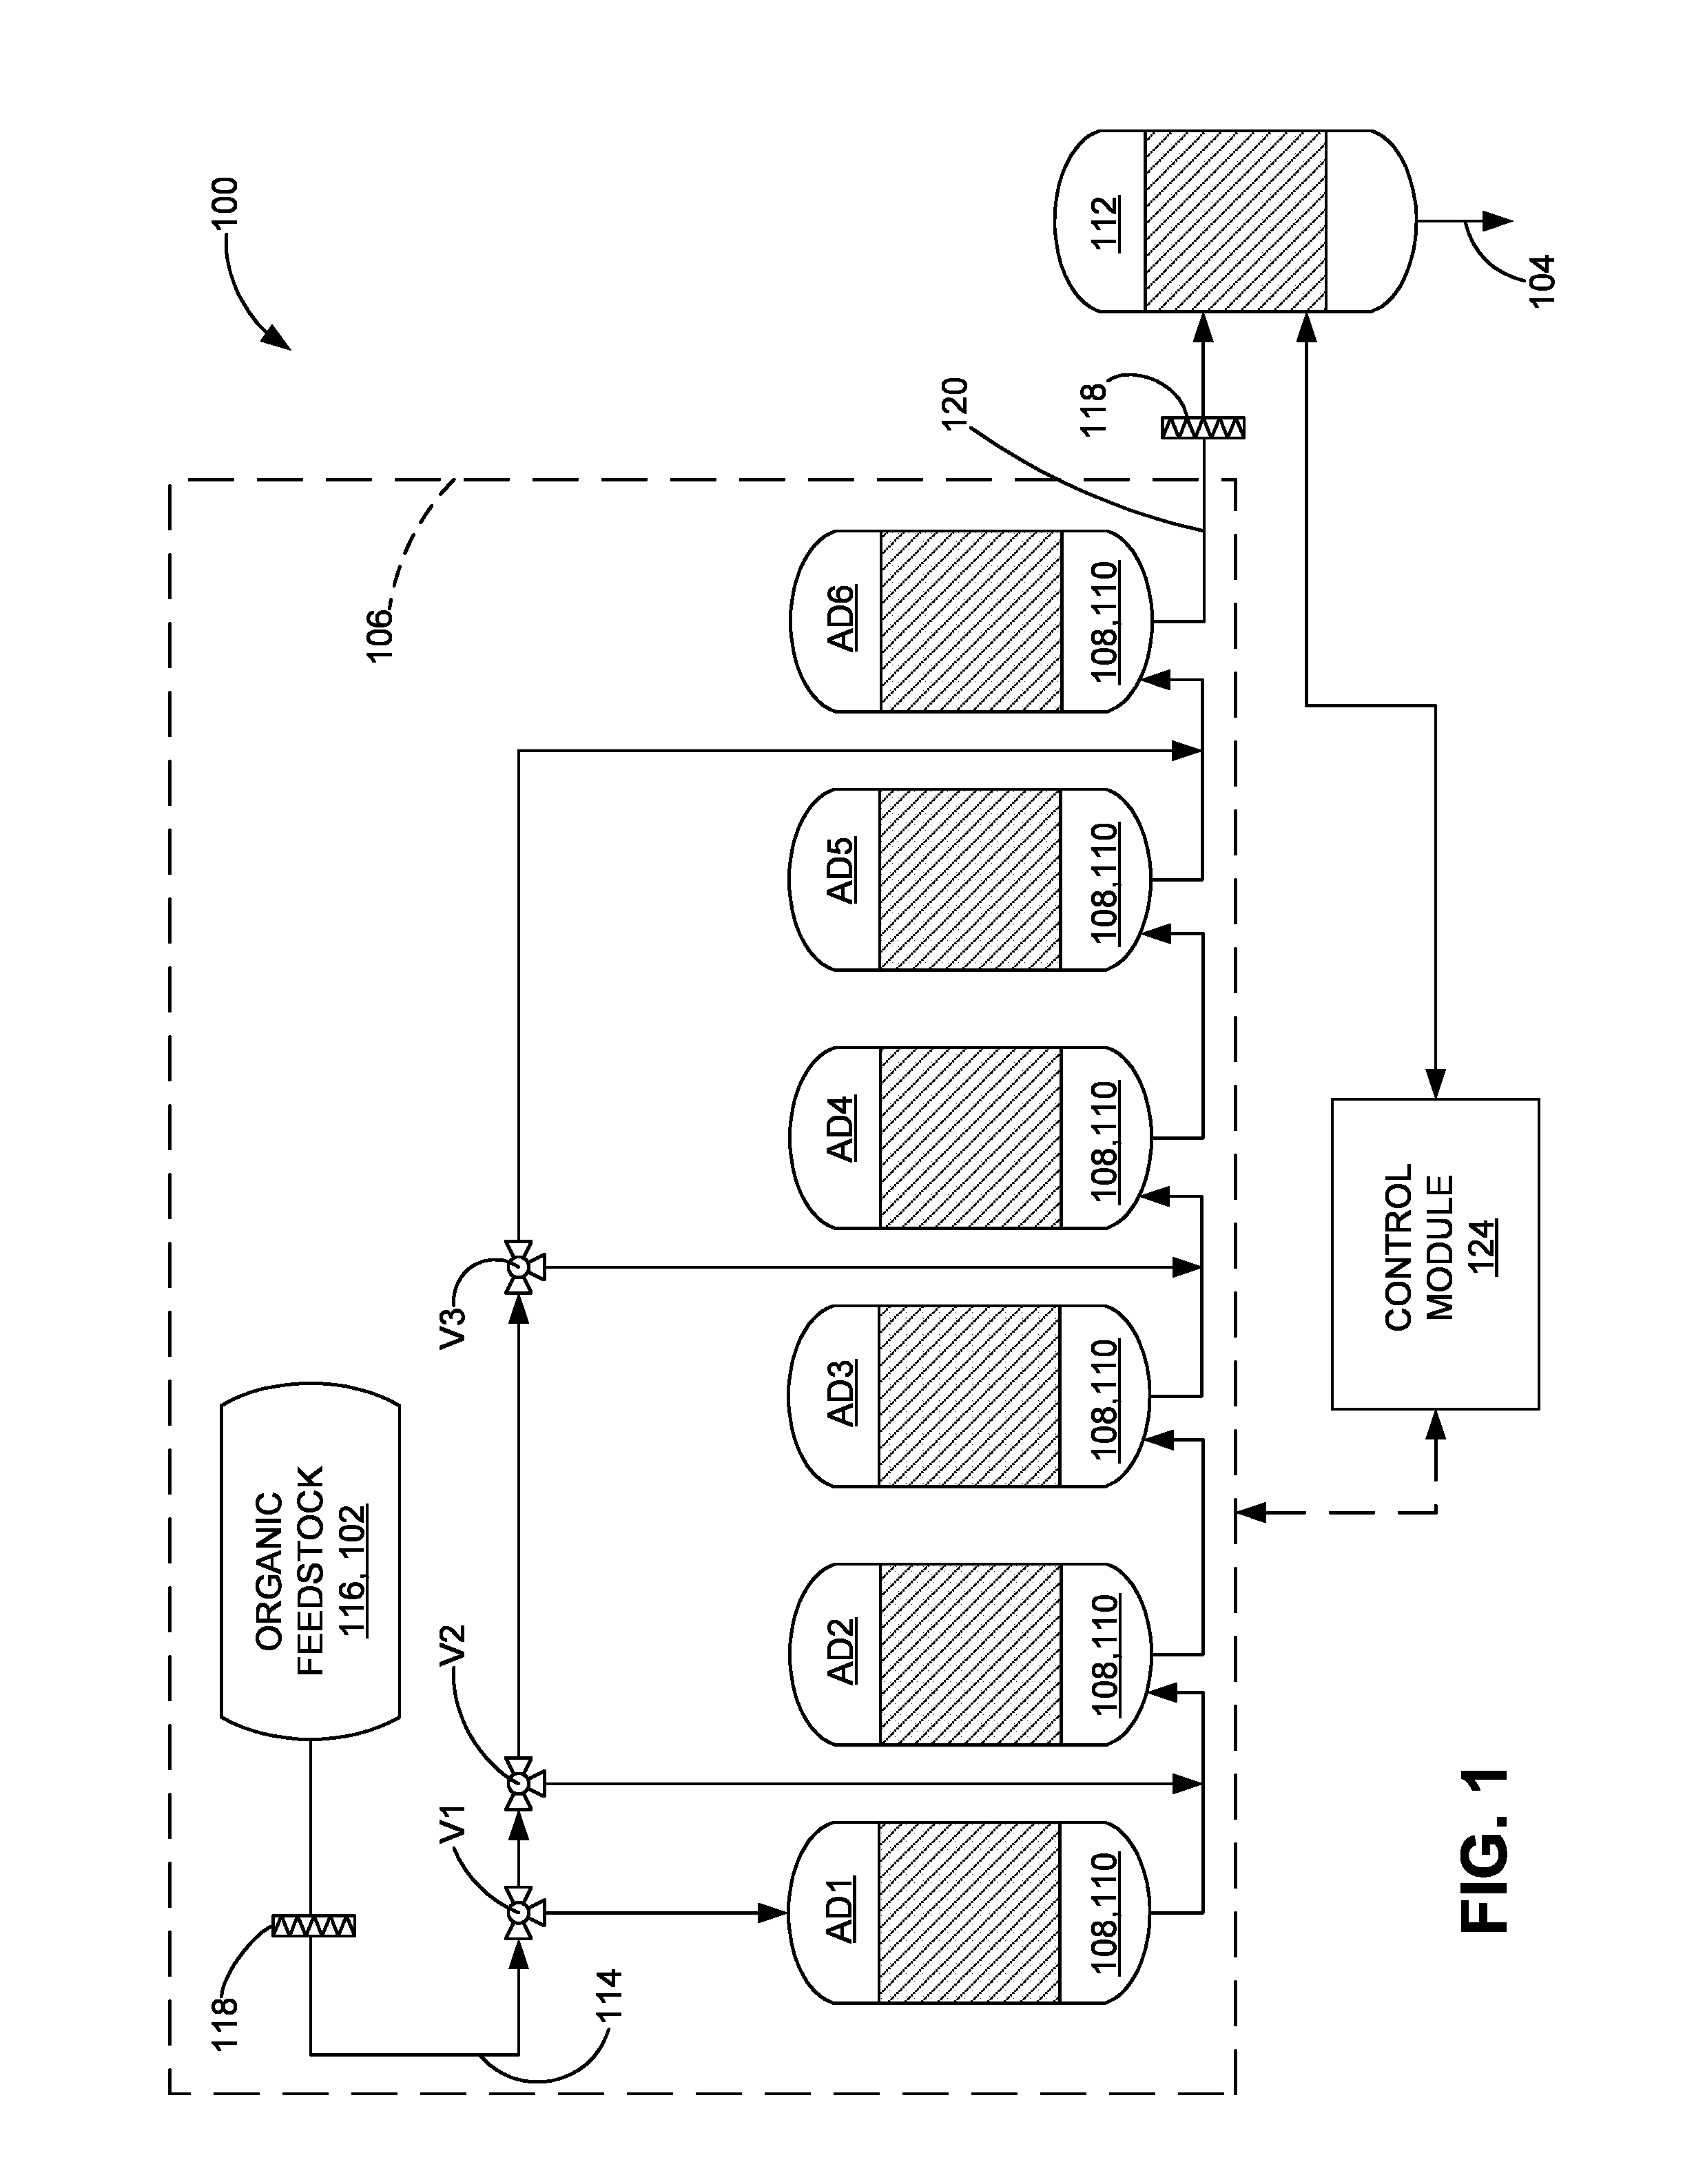 Methods and Systems for Converting Volatile Fatty Acids To Lipids